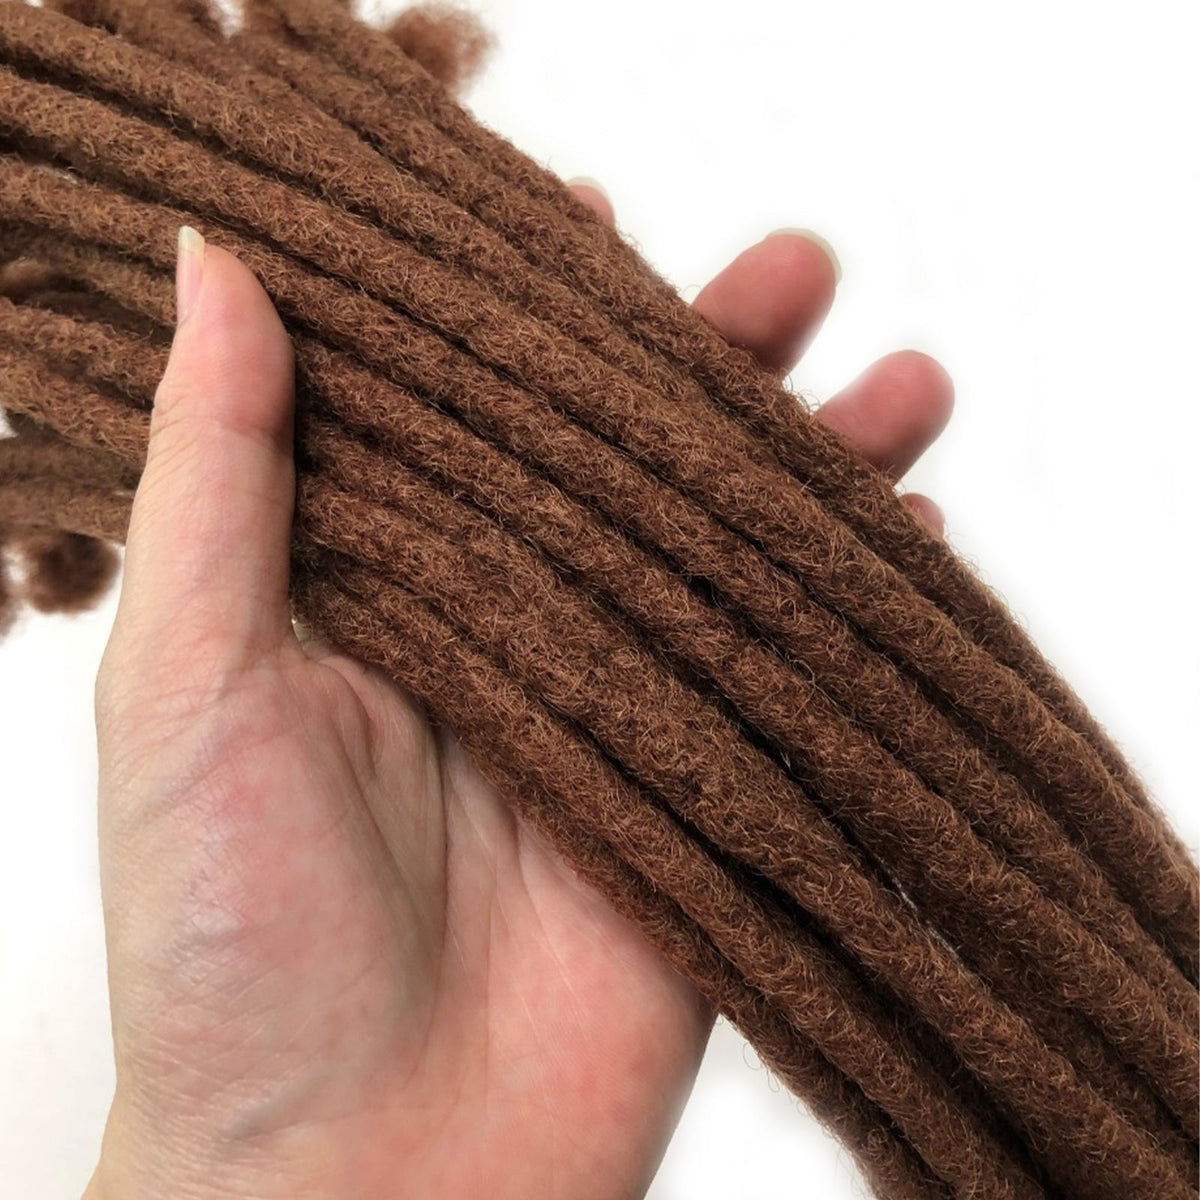 100% Human Hair Dreadlock Extensions 8 Inch 10 Strands Handmade Natural Loc Extensions Human Hair Bundle Dreads Extensions For Woman & Men Can Be Dyed/Bleached (Brown / 33, 8 inch length 0.6 cm Width